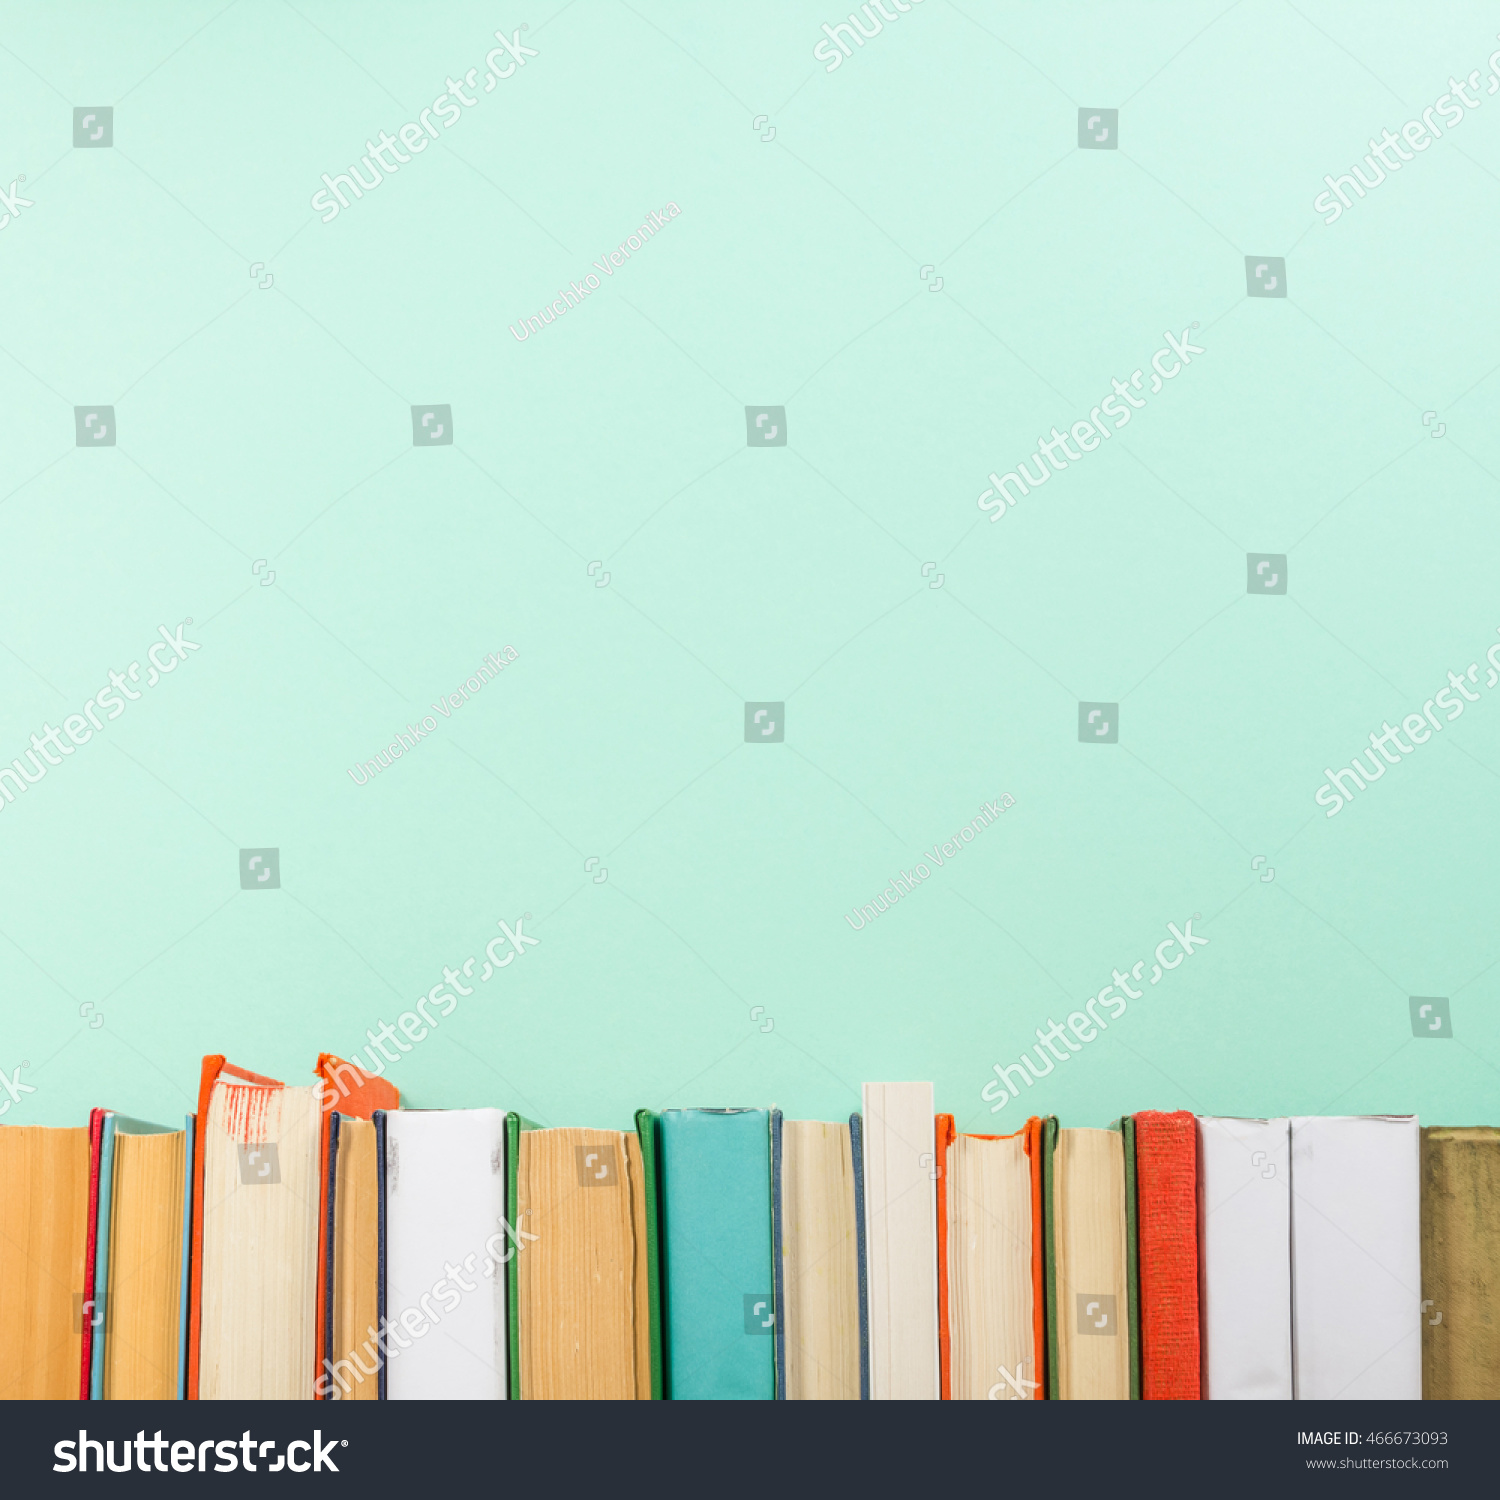 Books on grunge wooden table desk shelf in library. Back to school background with copy space for your ad text. Old hardback   no labels, blank spine #466673093